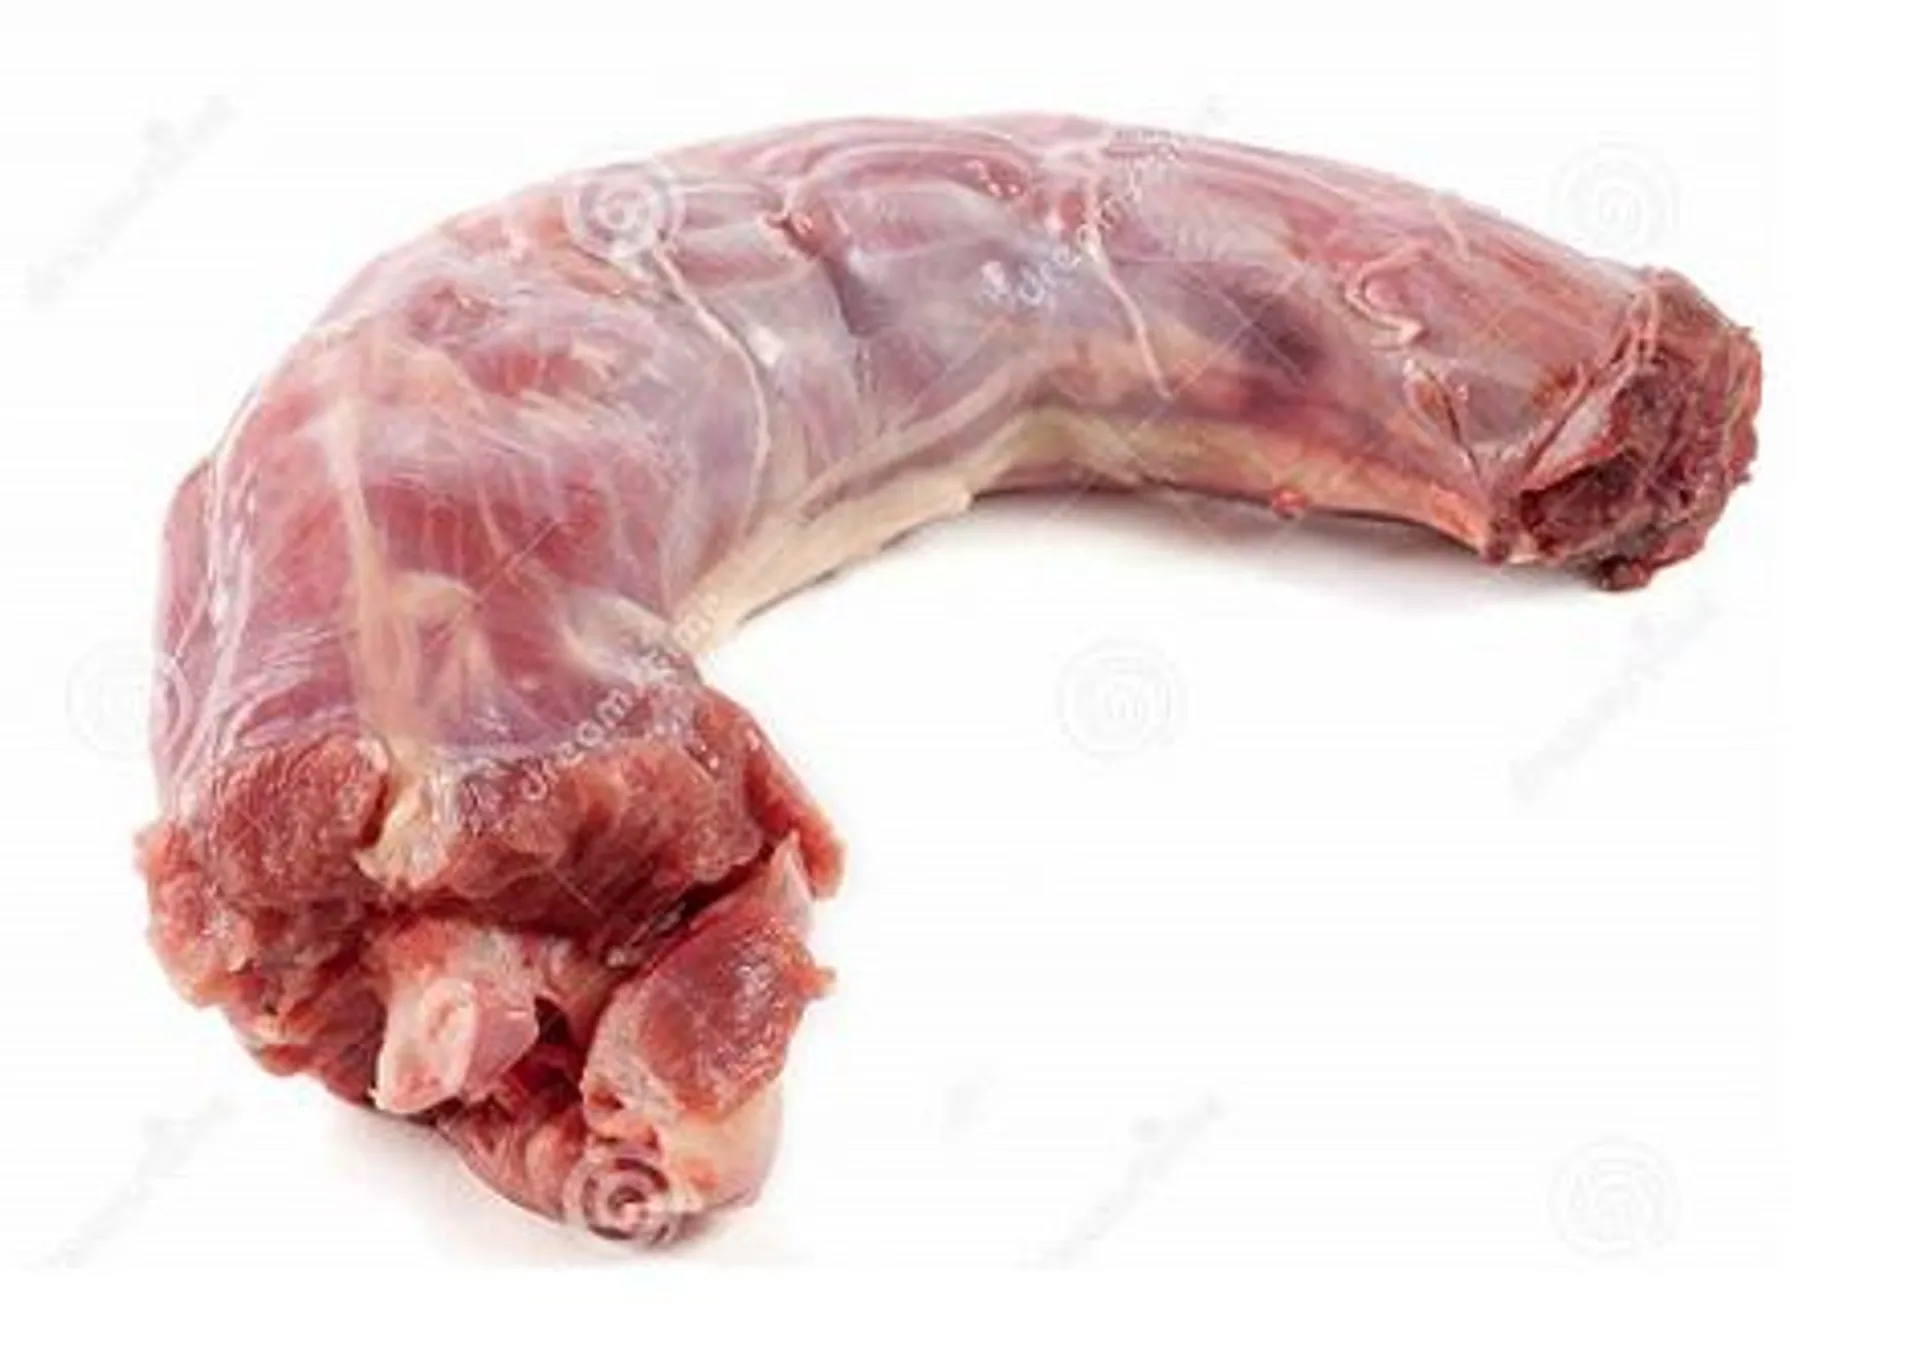 Turkey neck (approx 2lb) - 1pack